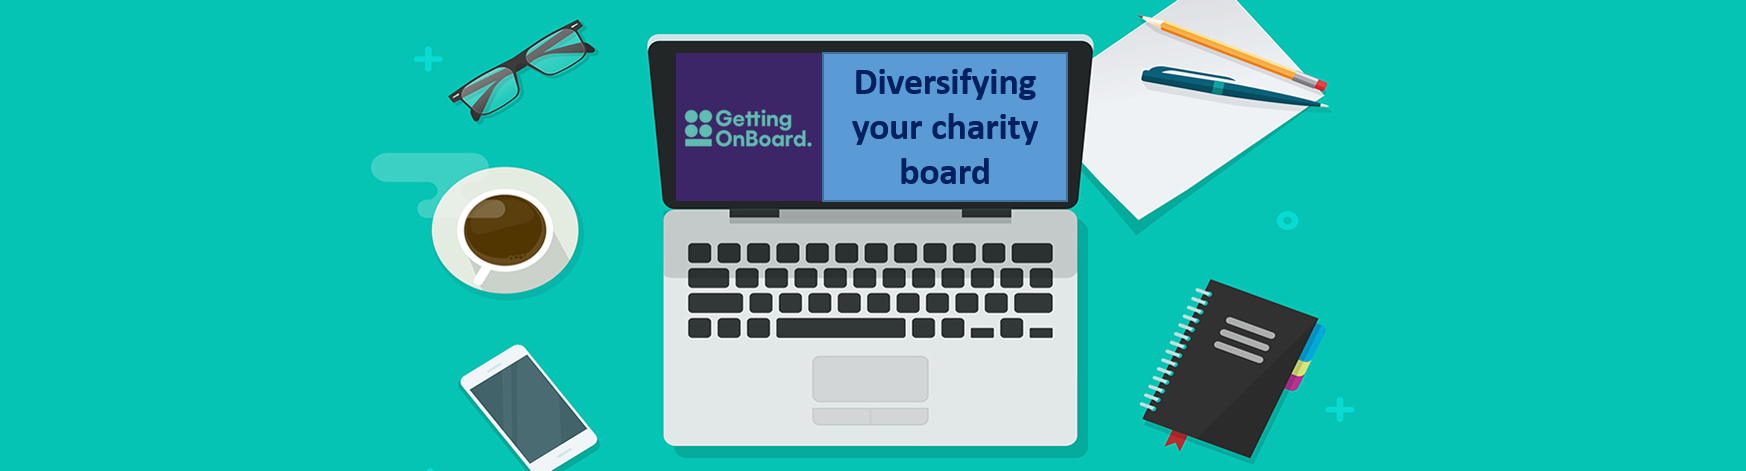 Diversifying your Charity Board